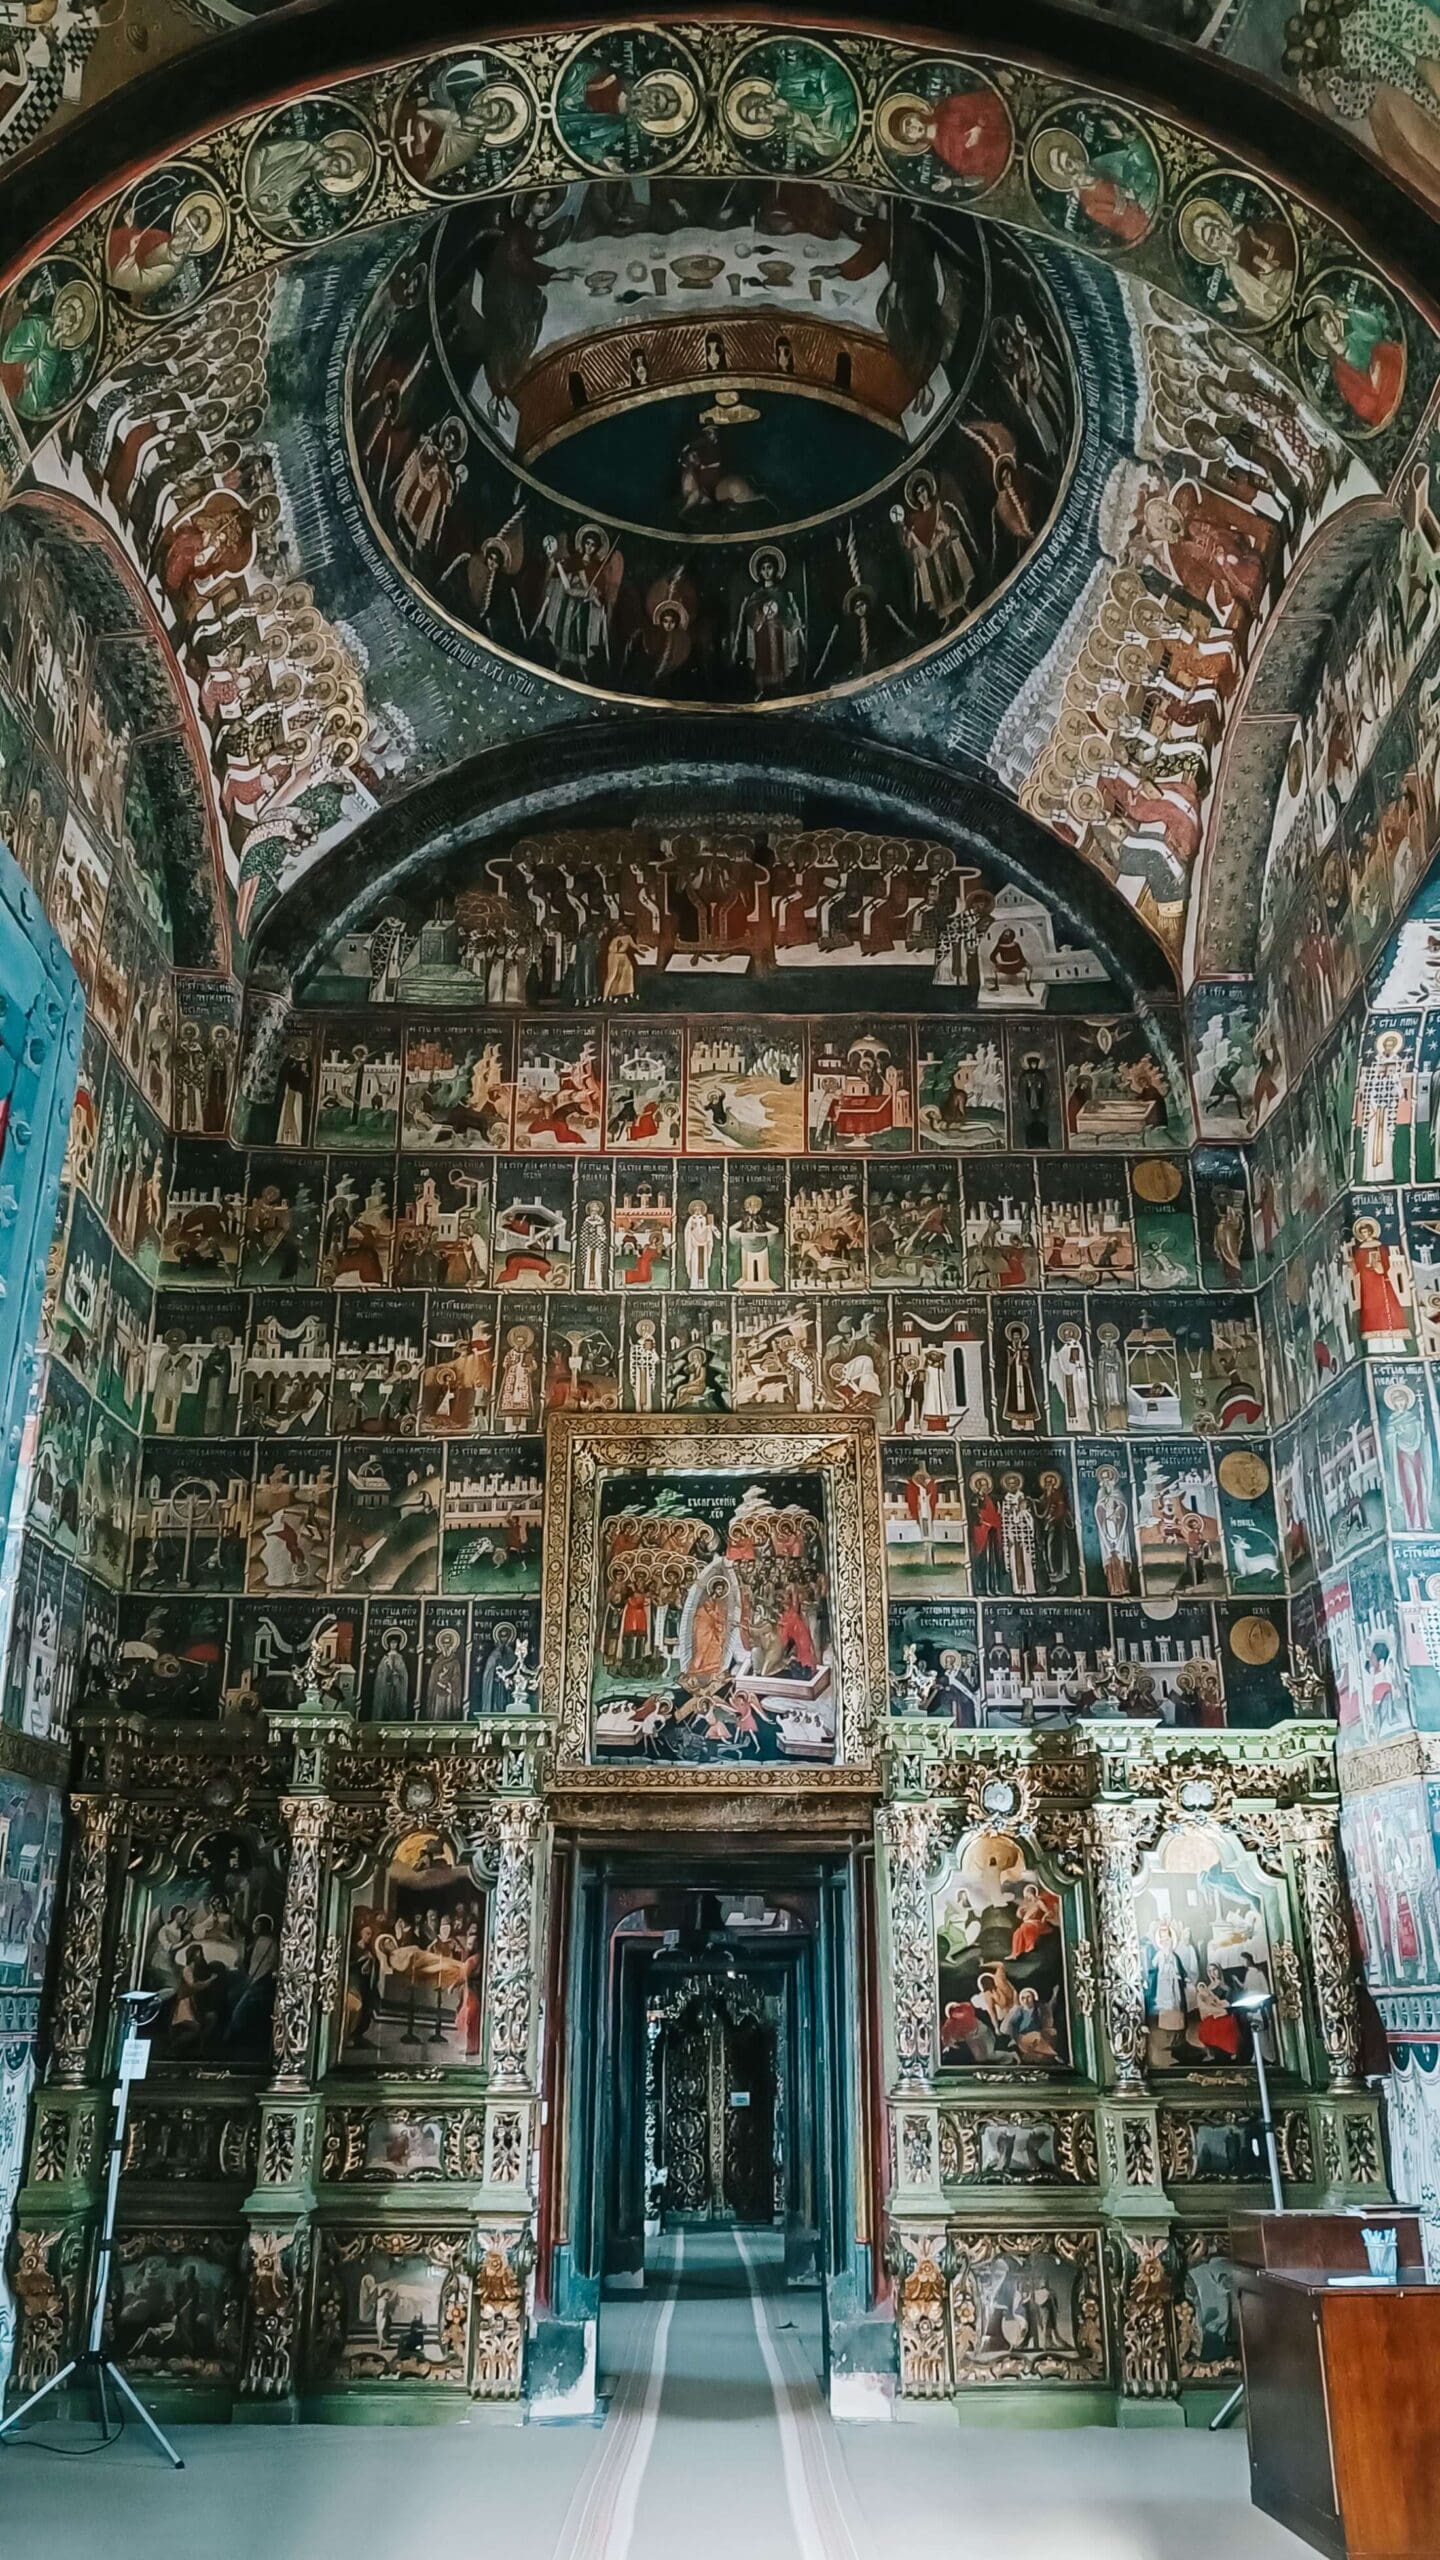 The interior of a painted church in Bucovina, as seen on Romania's Via Transilvanica by Slow Cyclists